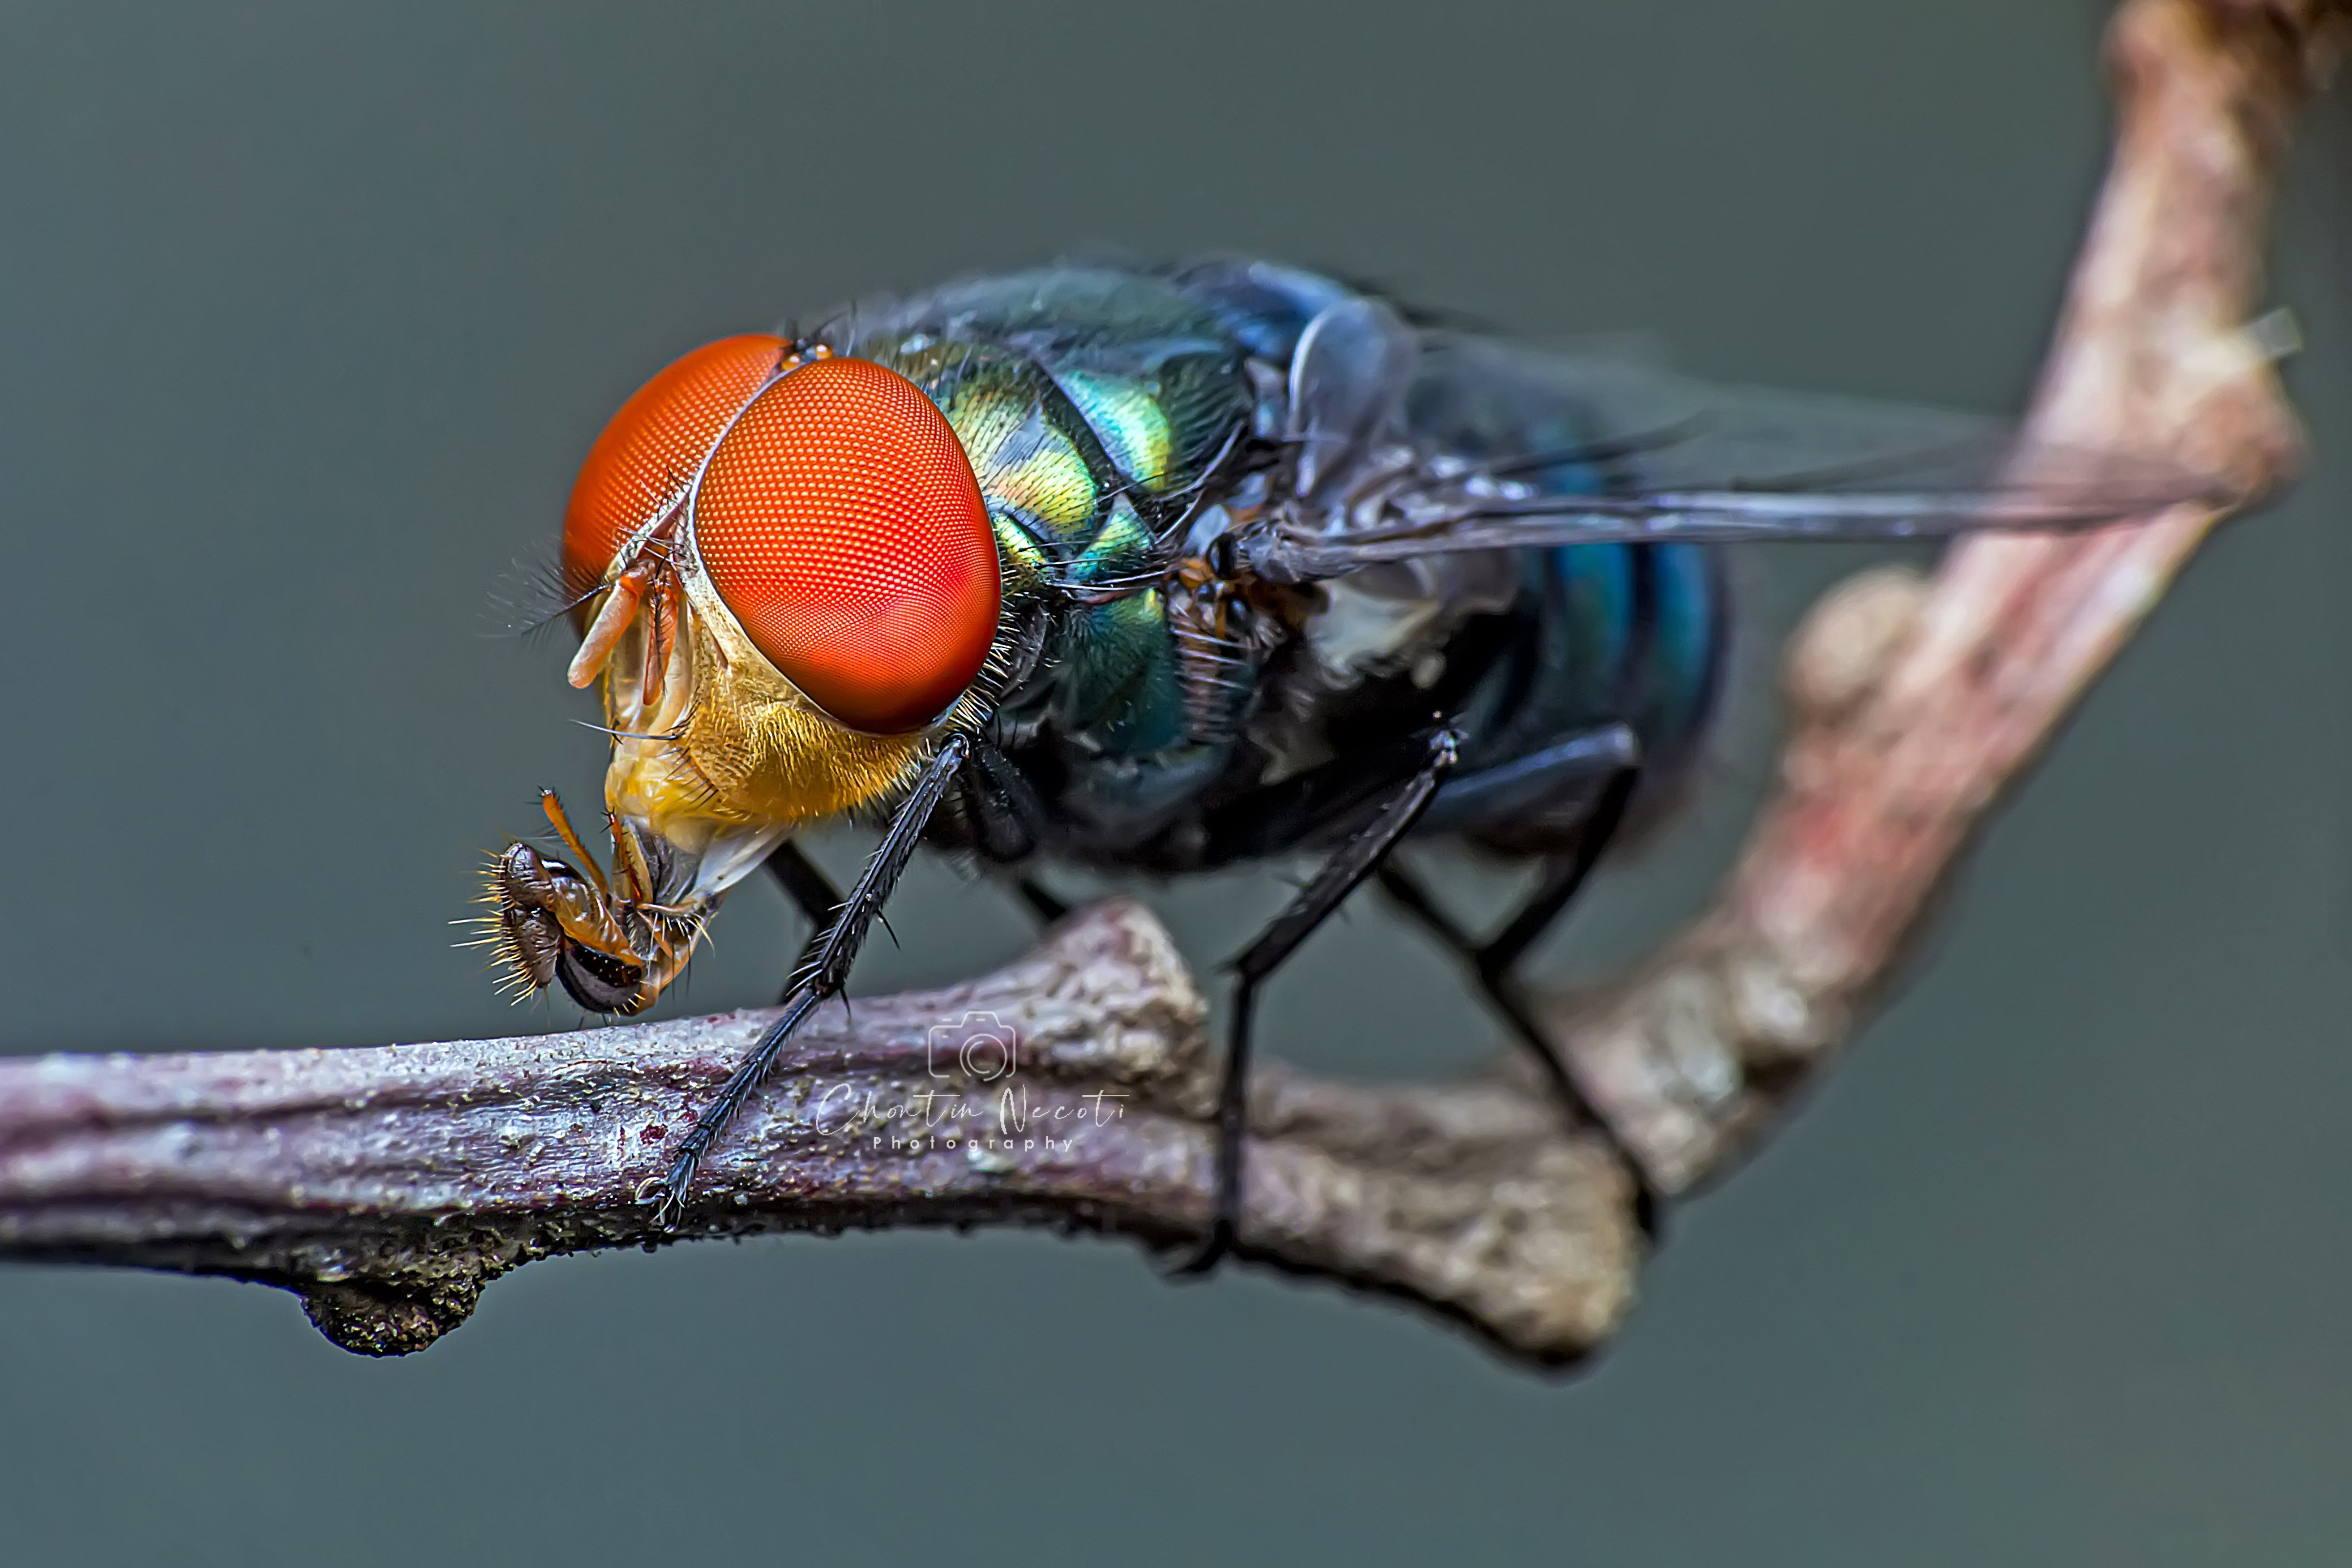 BLUEBOTTLE FLY, fly, bluebottle, insect, animal, beauty, beautiful, garden, forest, macro, small, eyes, NeCoTi ChonTin